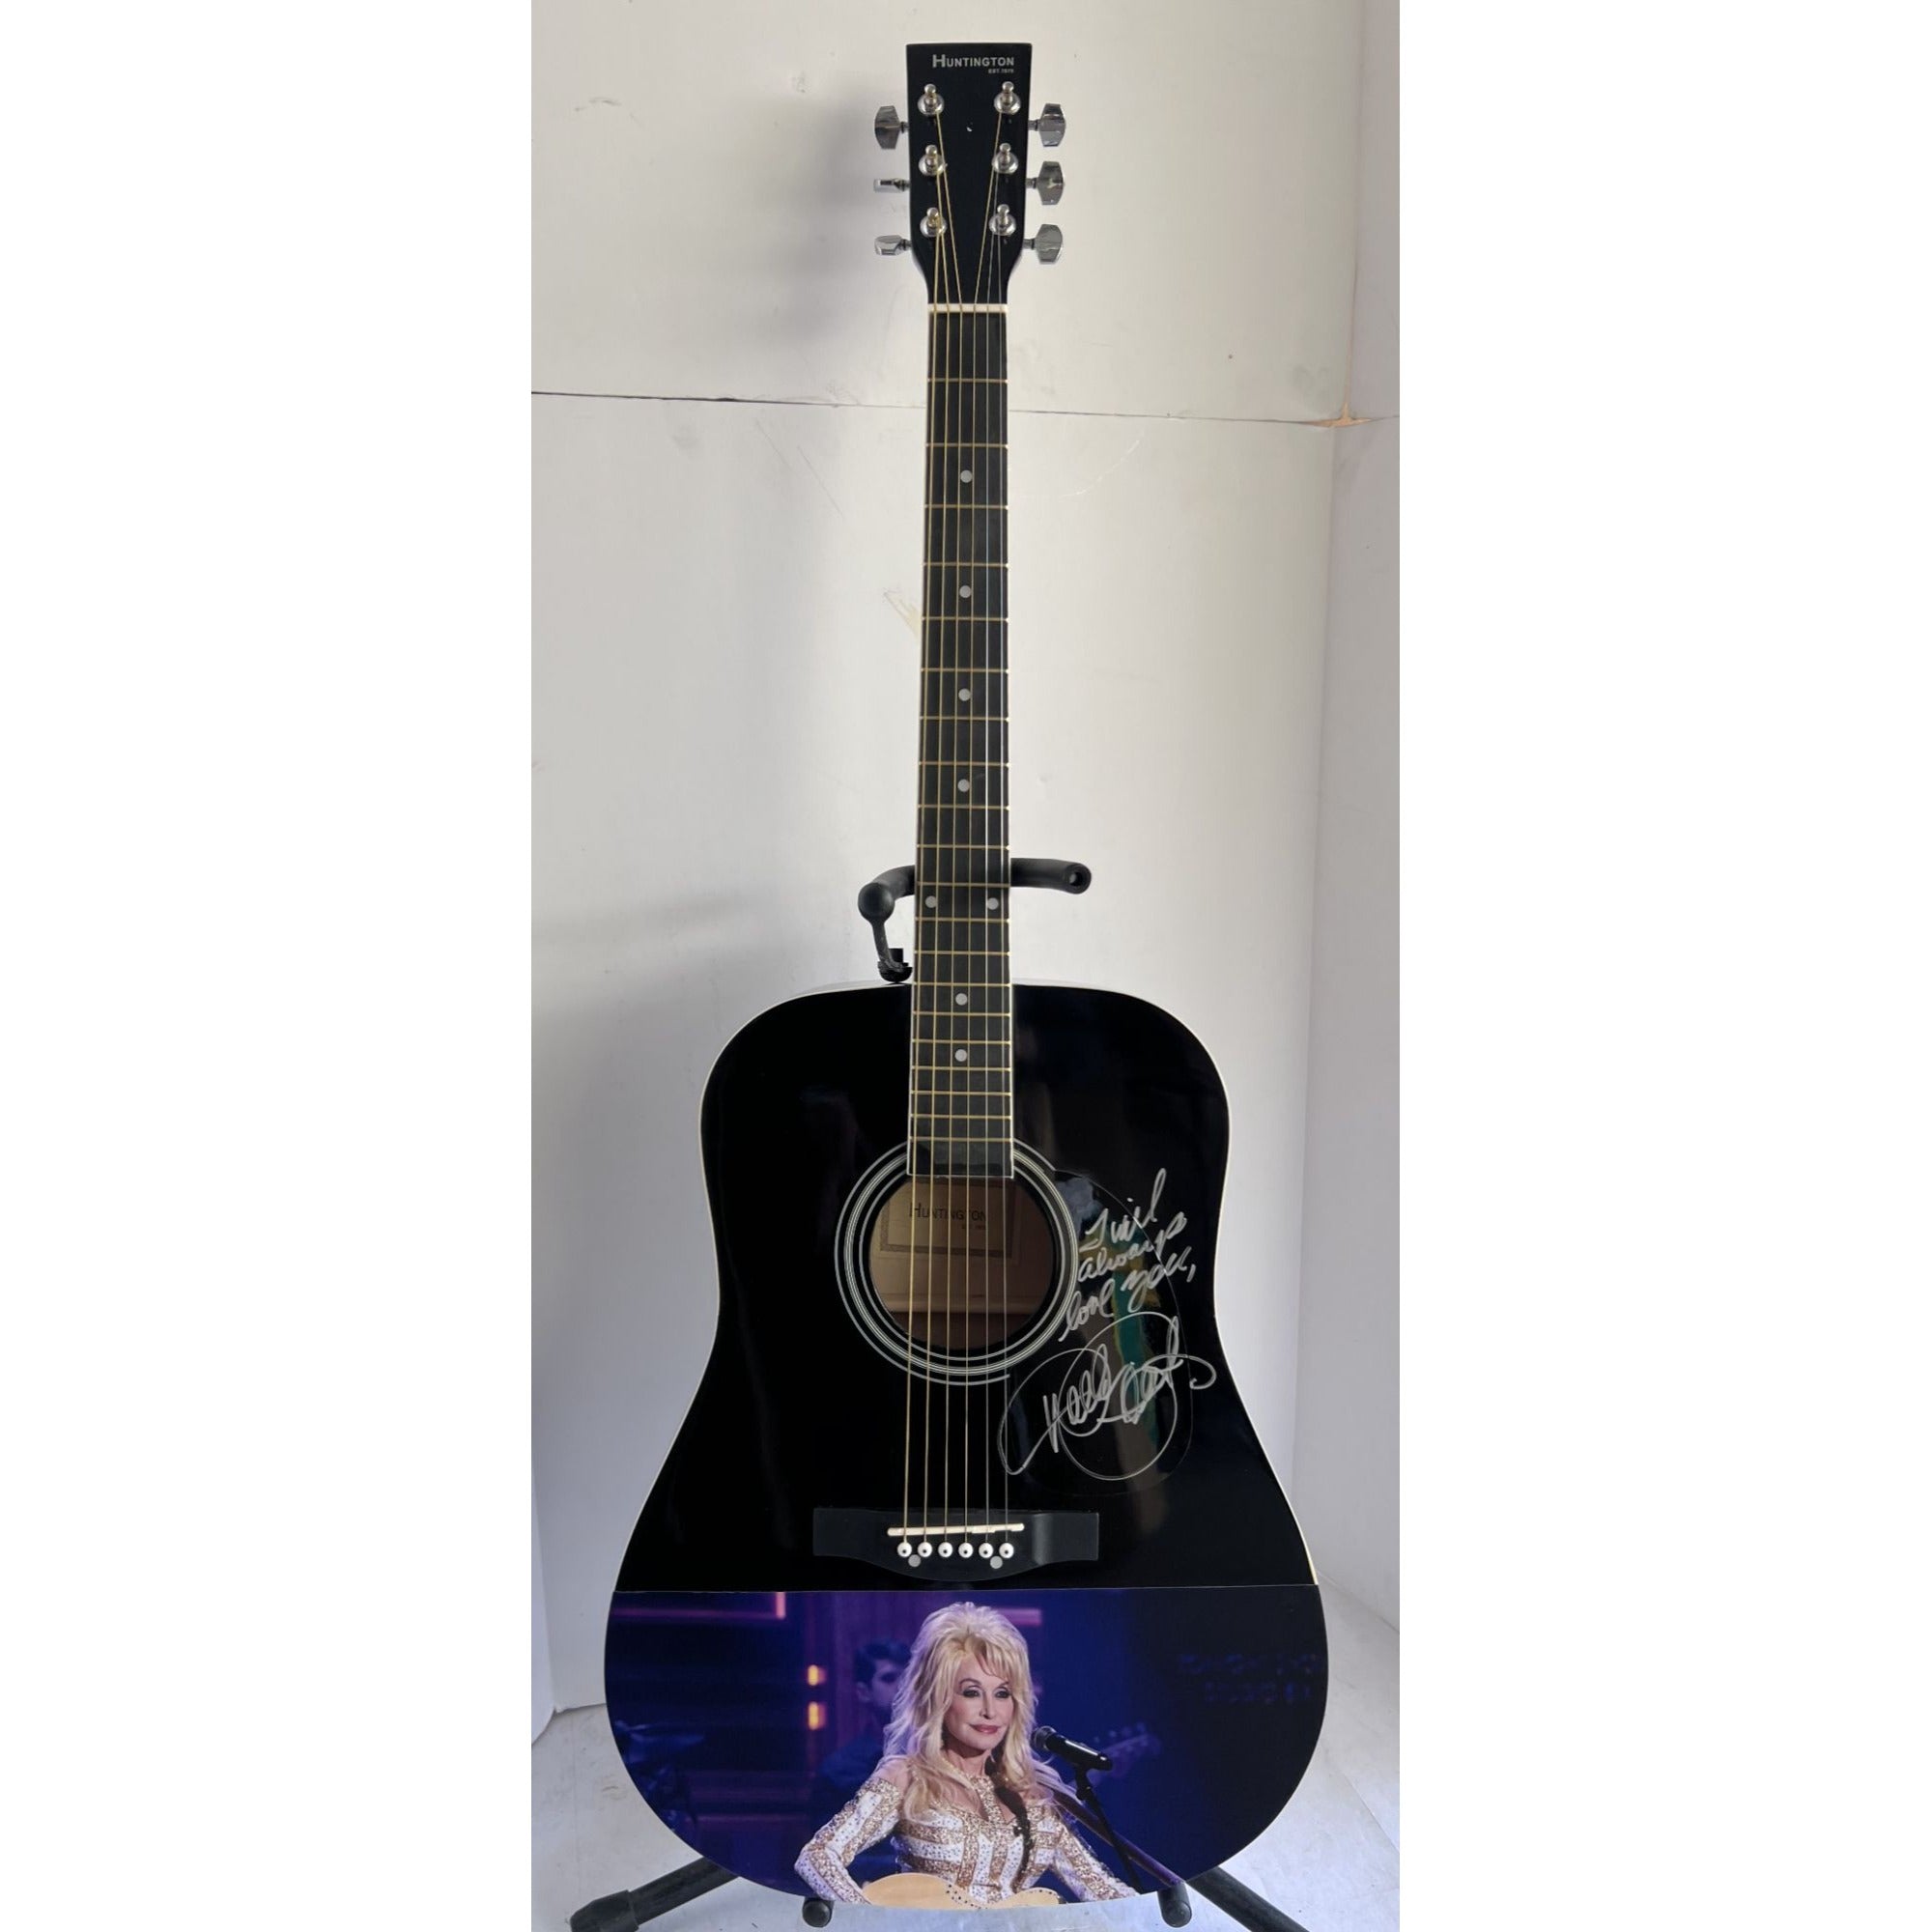 Dolly Parton one of a kind full size acoustic guitar signed and inscribed "I will always Love You" with photo proof